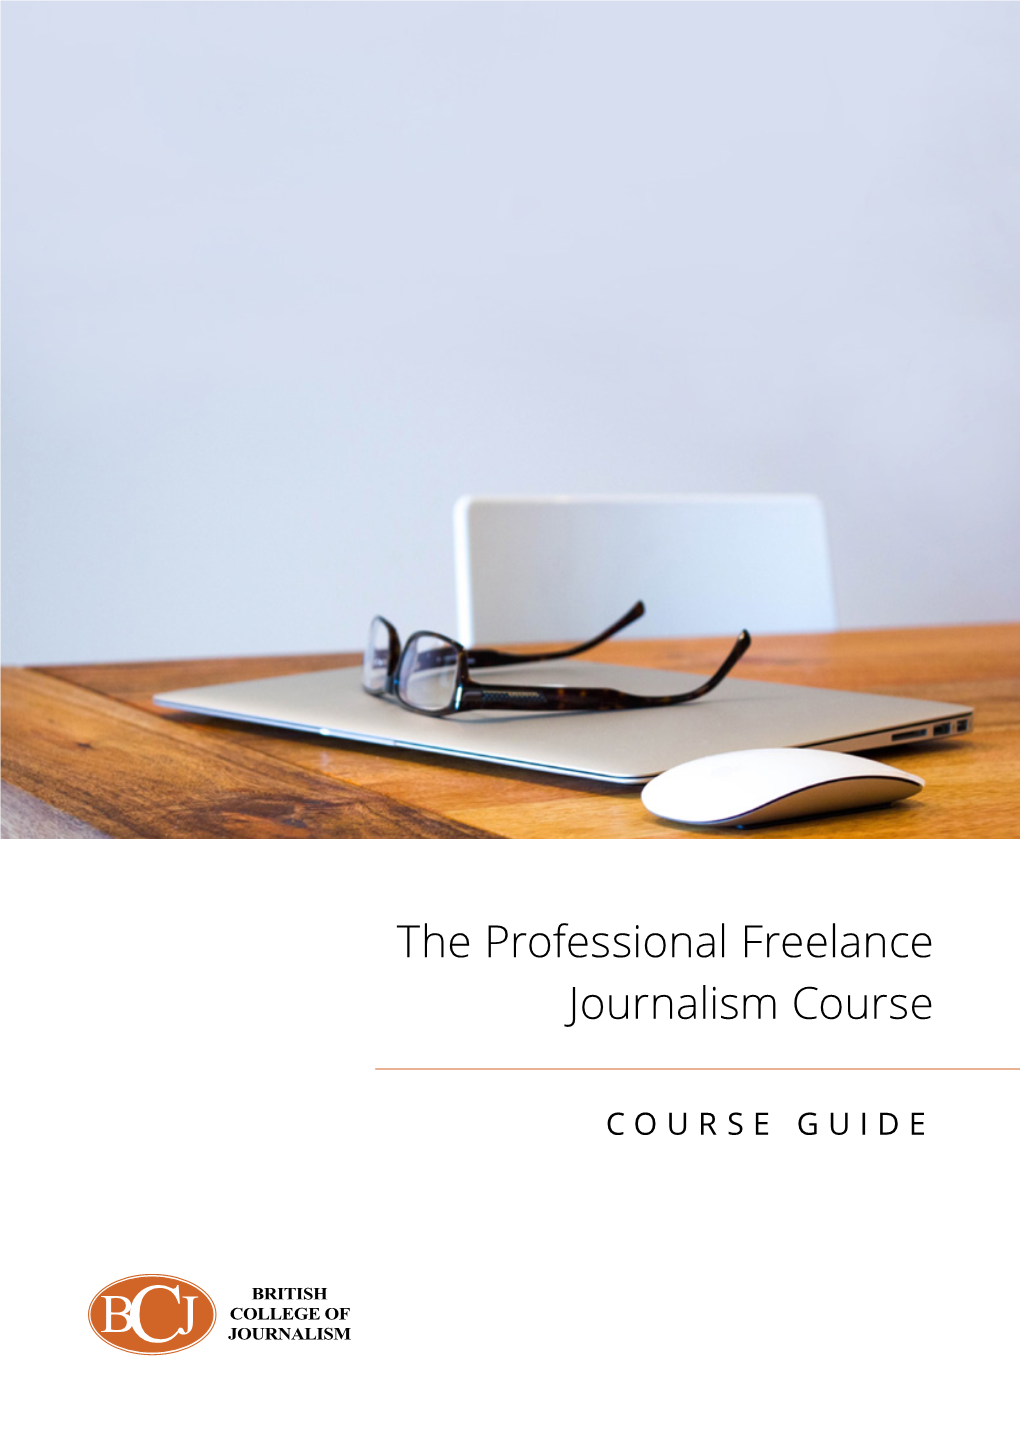 The Professional Freelance Journalism Course